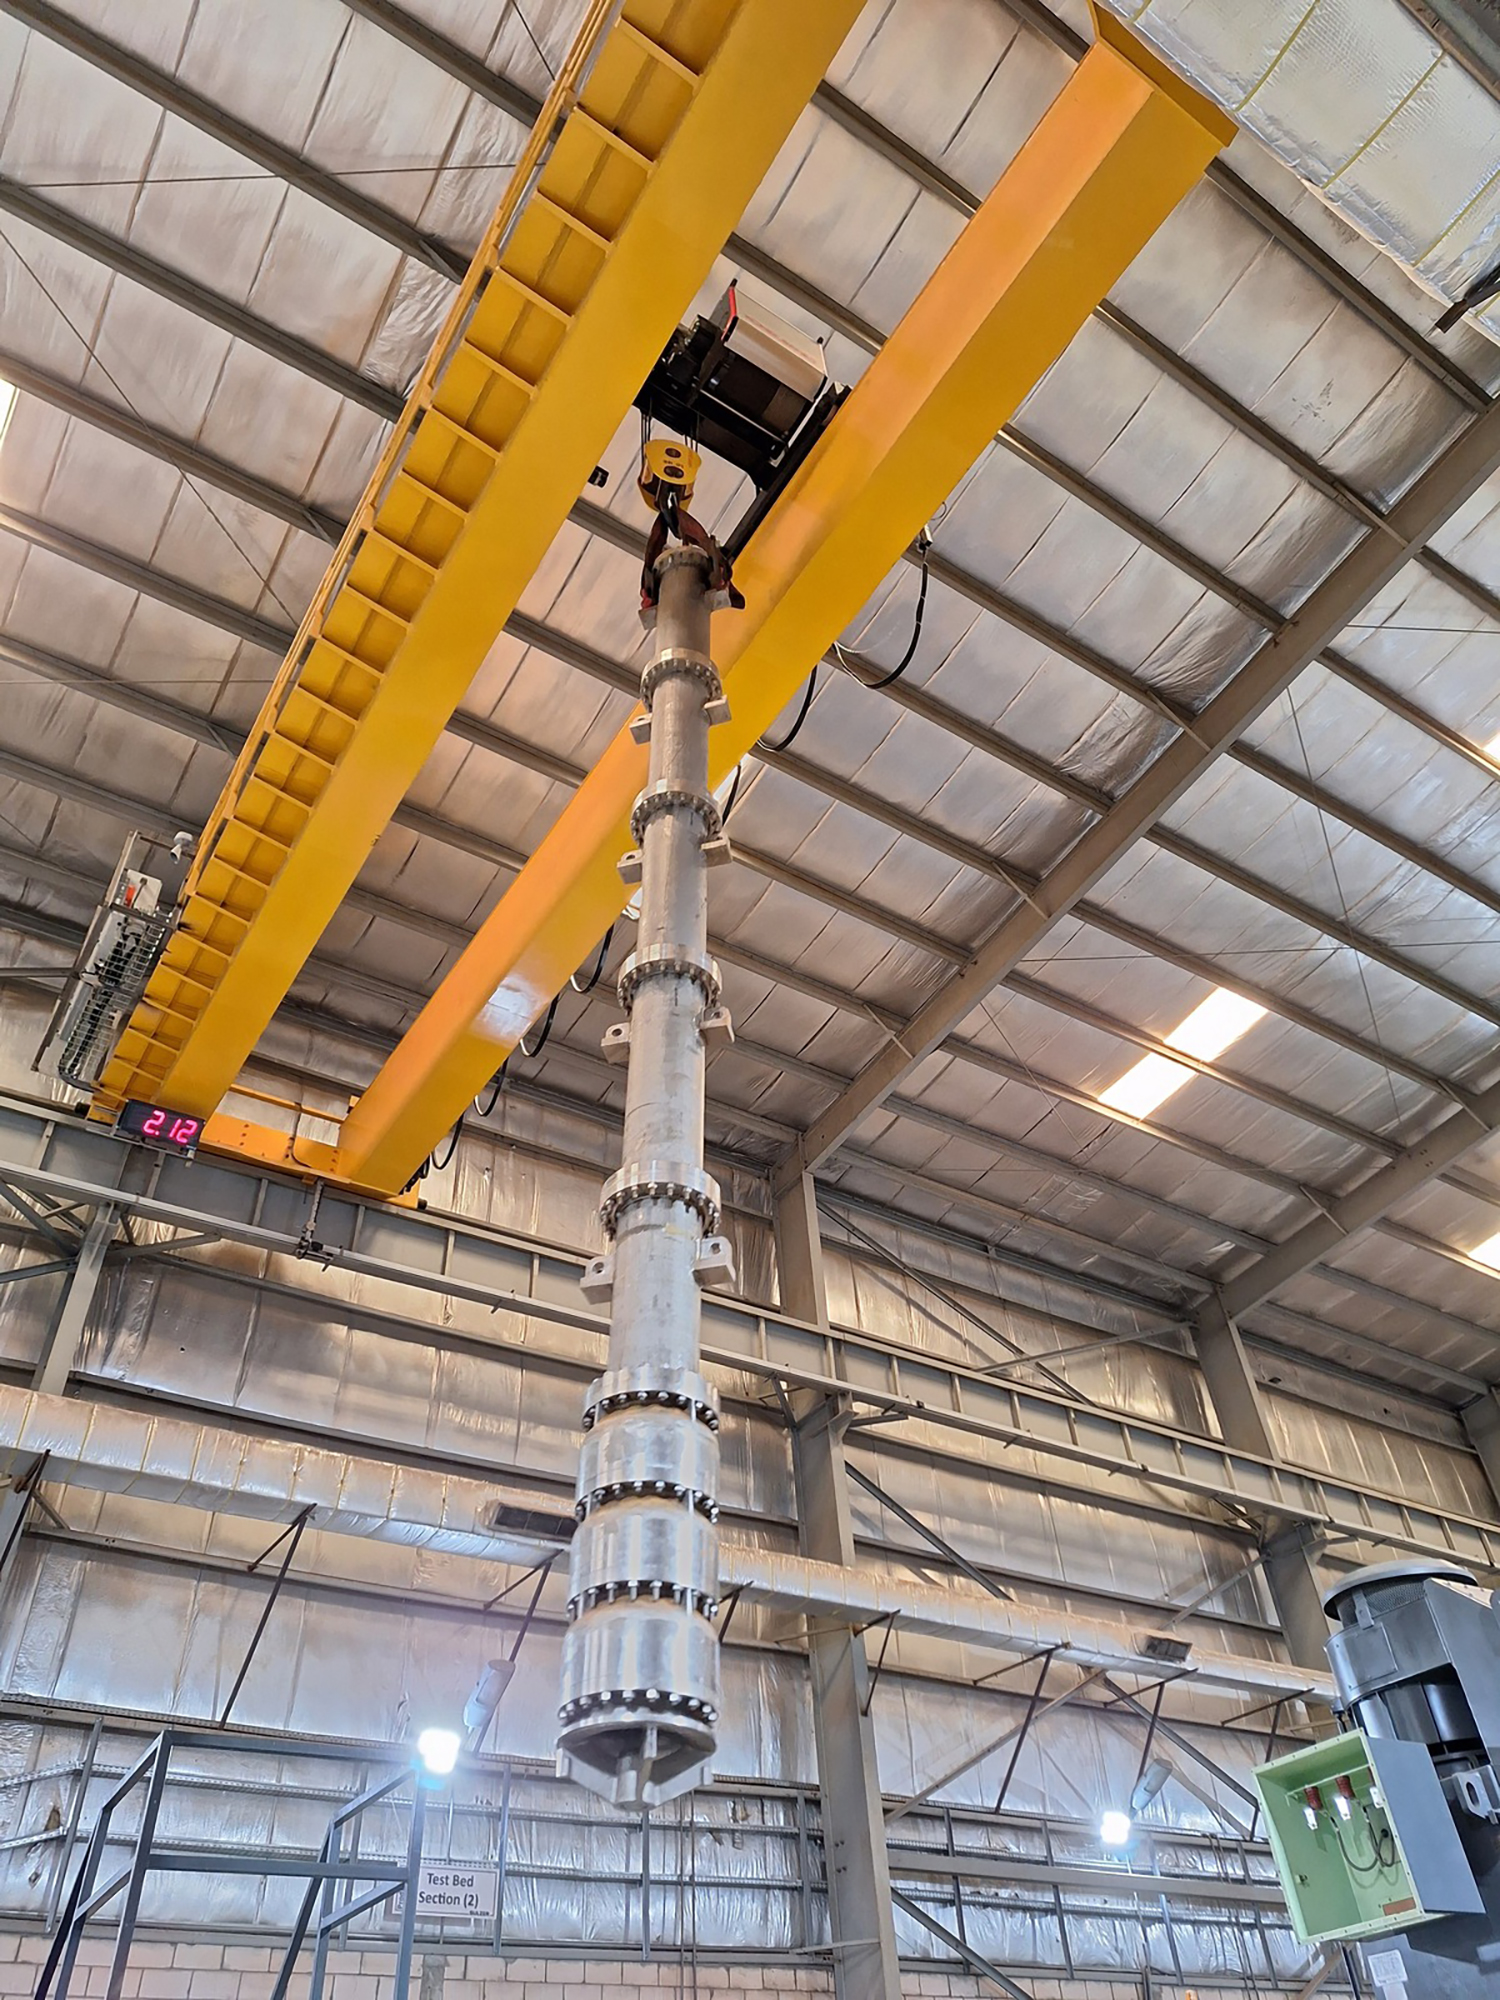 Overhead cranes have been added to accommodate assembly, packaging and performance testing of some of the largest pumps in the Sulzer portfolio.